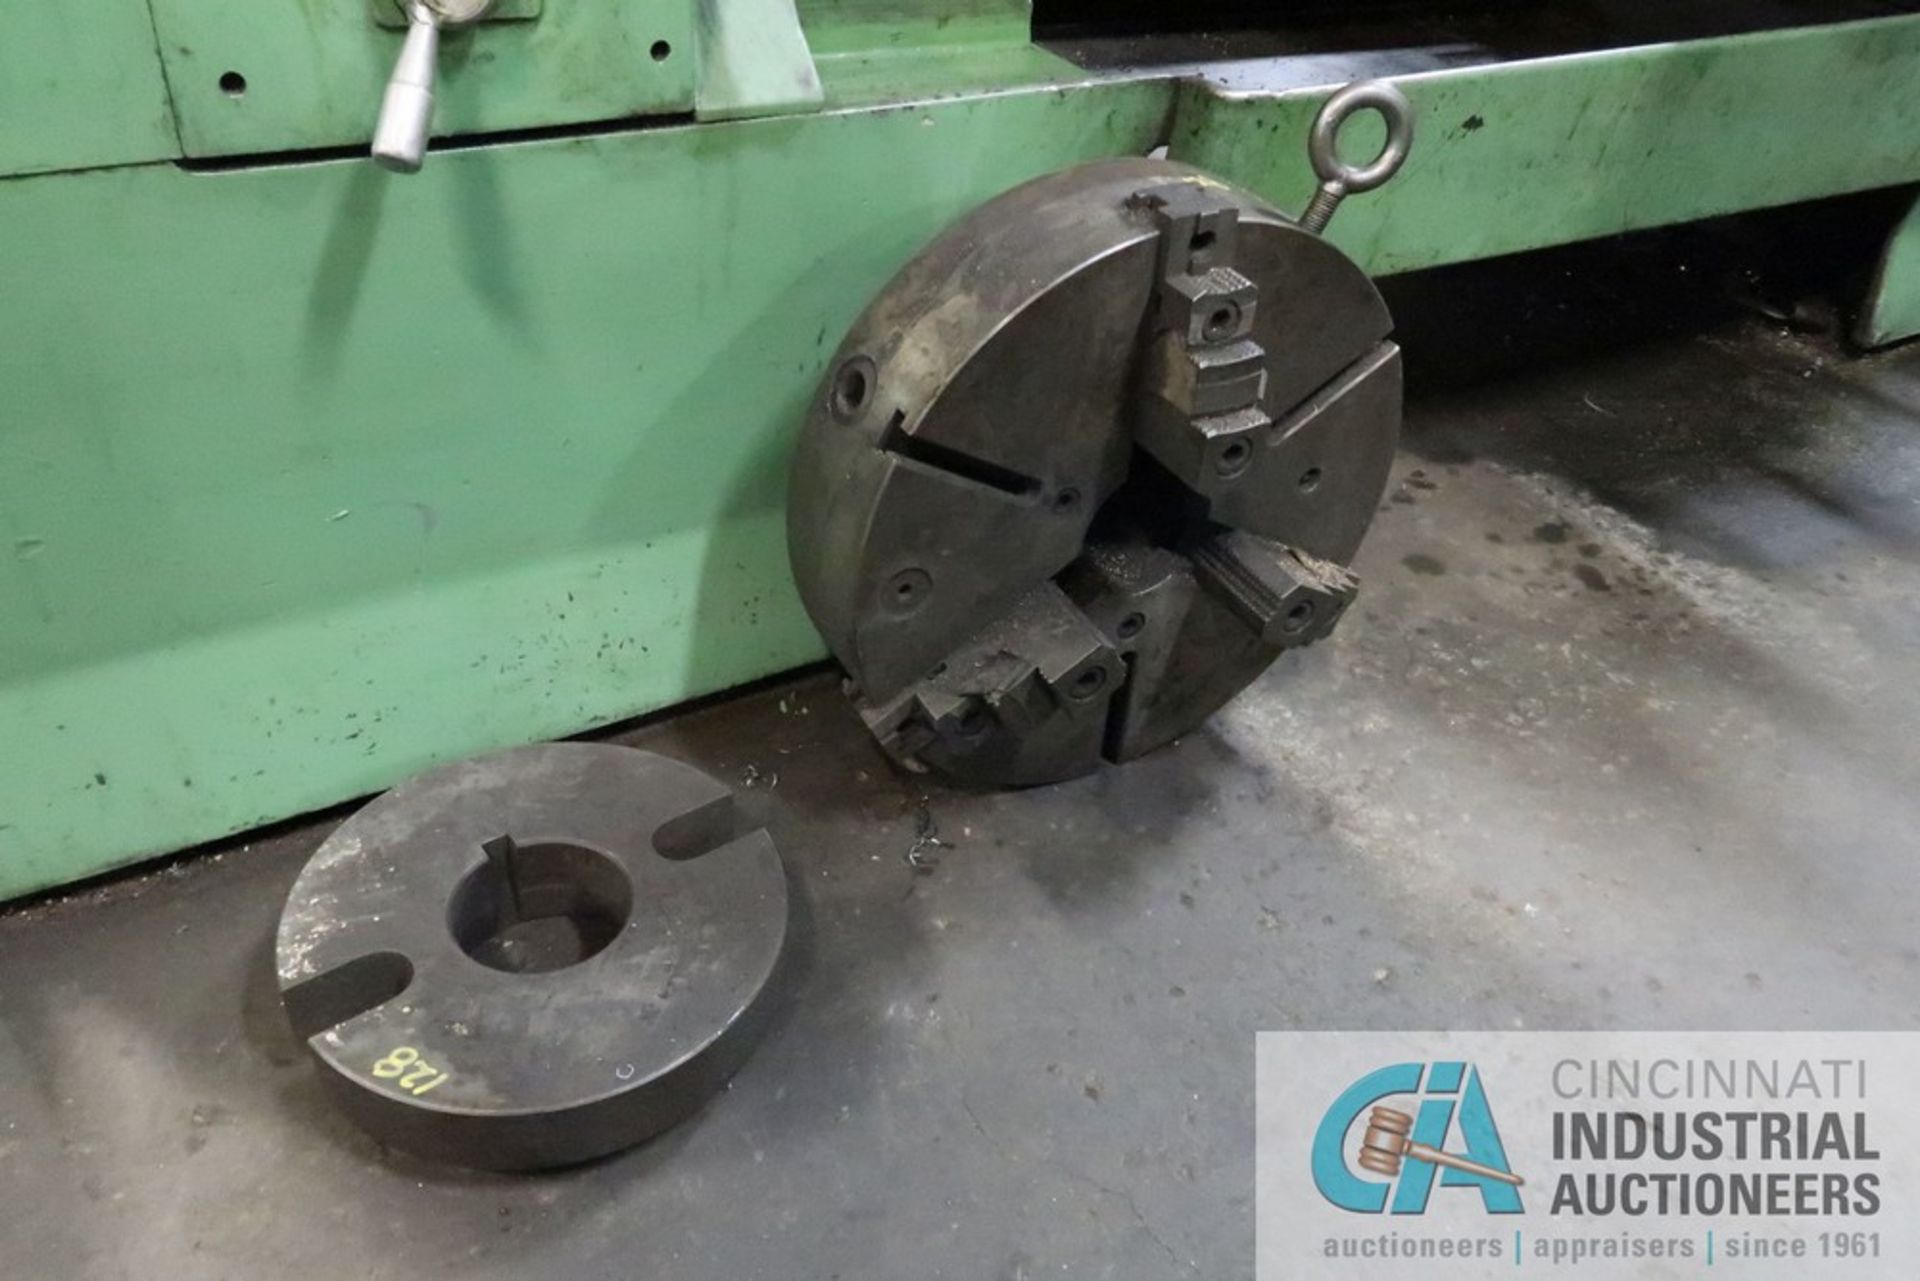 26" X 96" LEBLOND ENGINE LATHE; S/N 5H-555, 2" SPINDLE HOLE, 18" 4-JAW CHUCK, TAPER ATTACHMENT, - Image 13 of 15